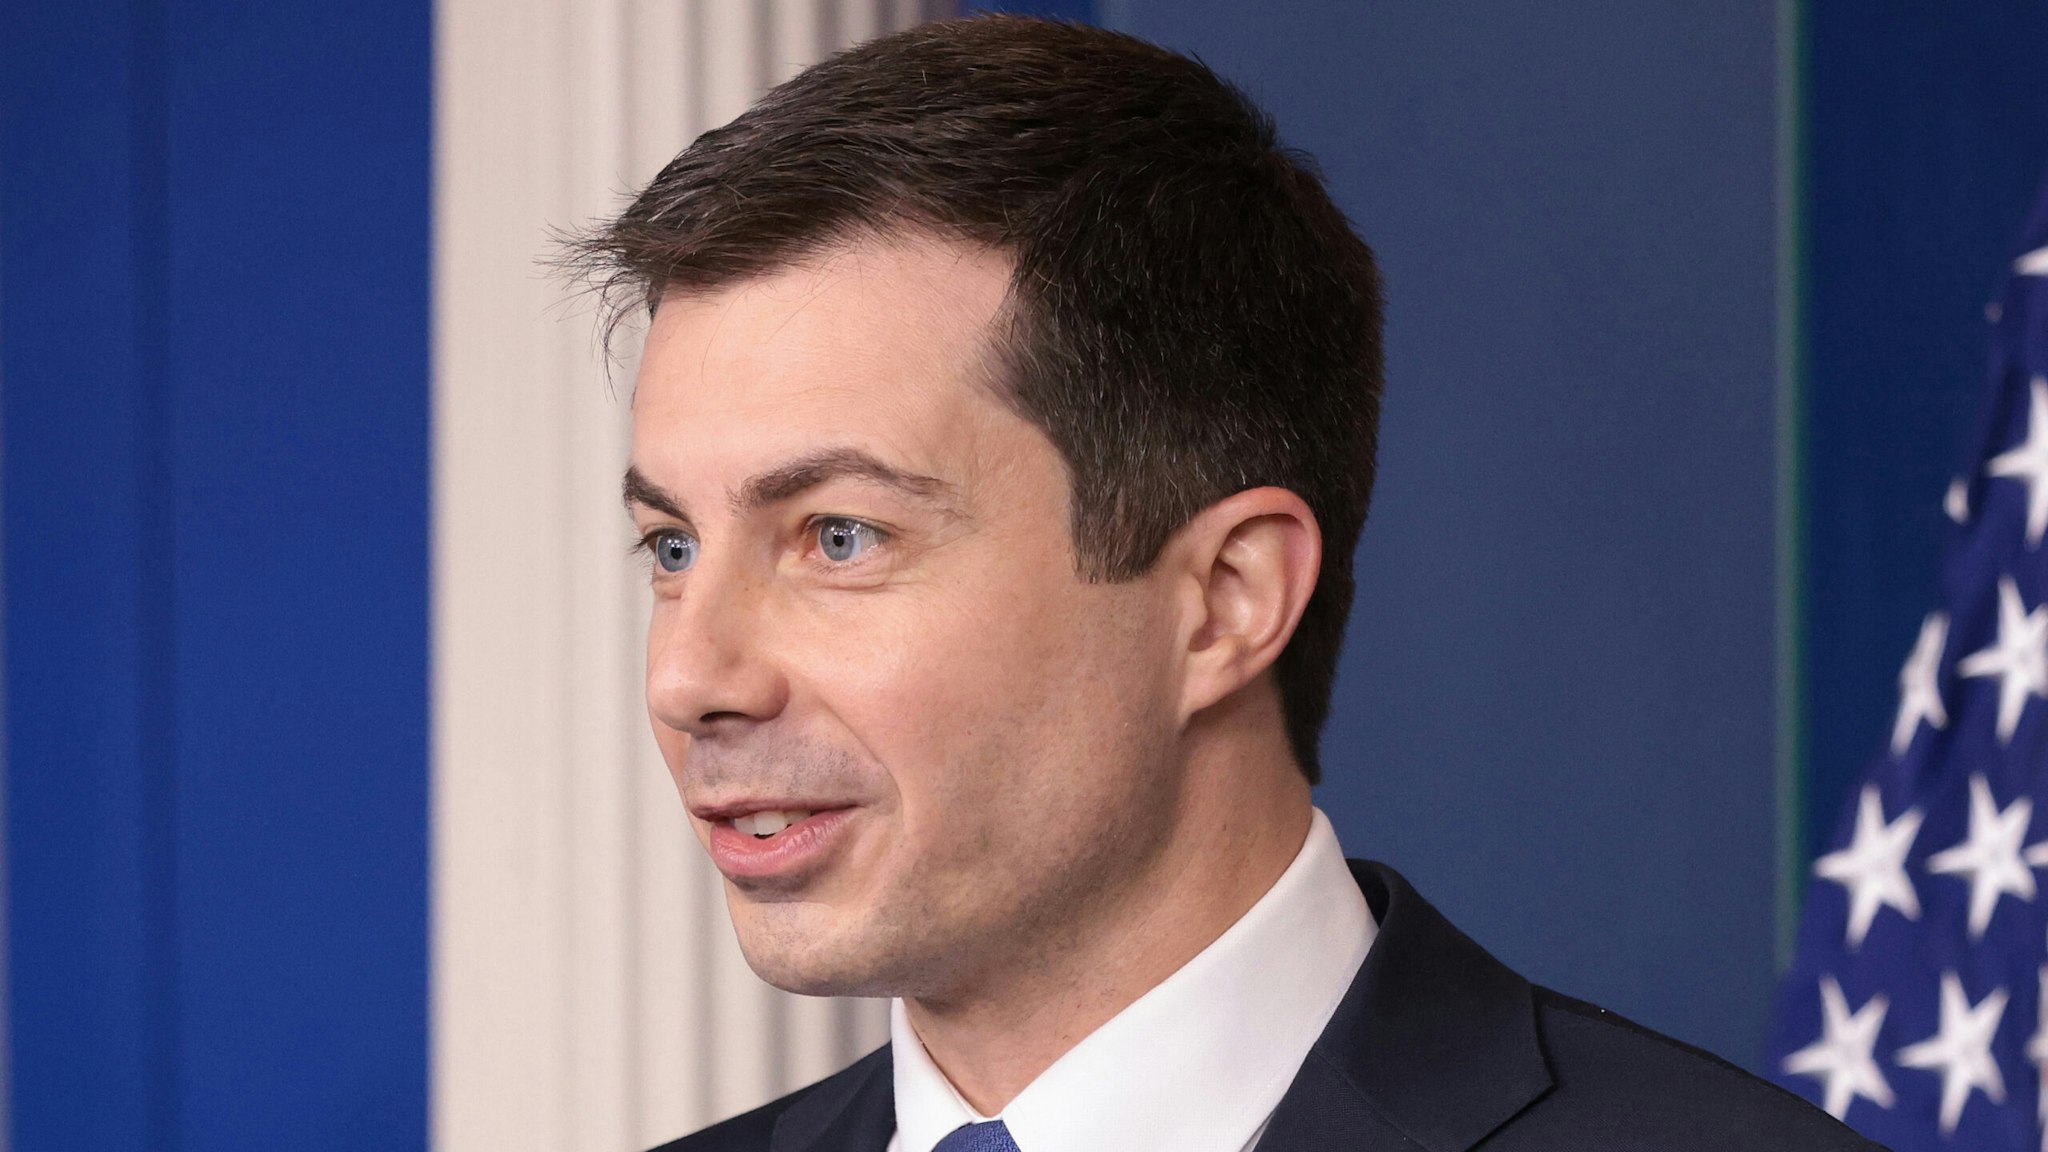 WASHINGTON, DC - NOVEMBER 08: U.S. Secretary of Transportation Pete Buttigieg speaks during the daily briefing at the White House on November 08, 2021 in Washington, DC. Buttigieg answered a range of questions related to the recent passage of a $1.2 trillion infrastructure bill by the U.S. Congress.